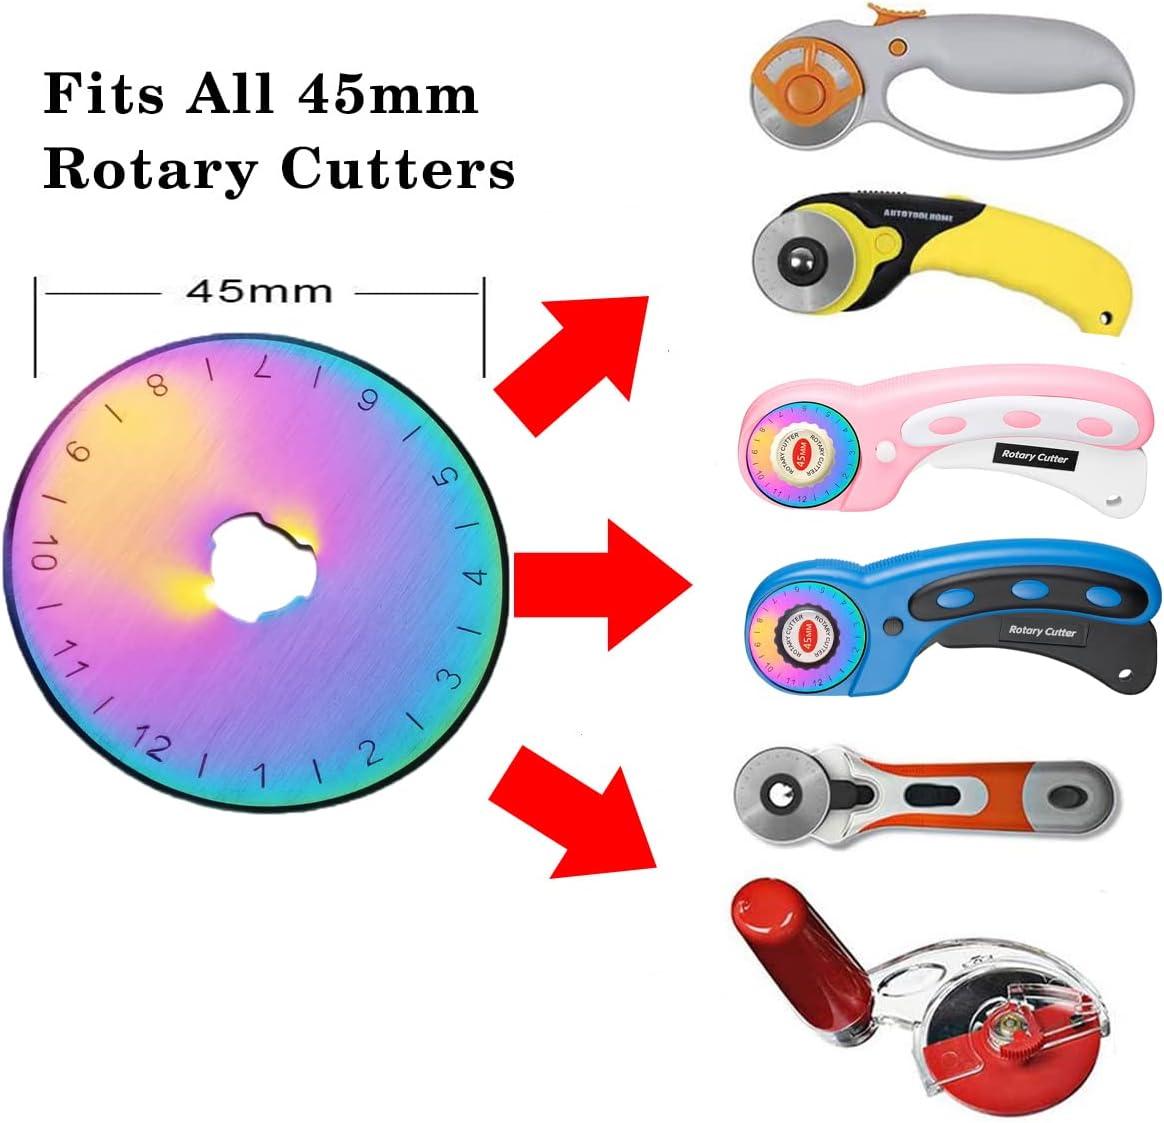 45mm Rotary Cutter Refill, 1-pack